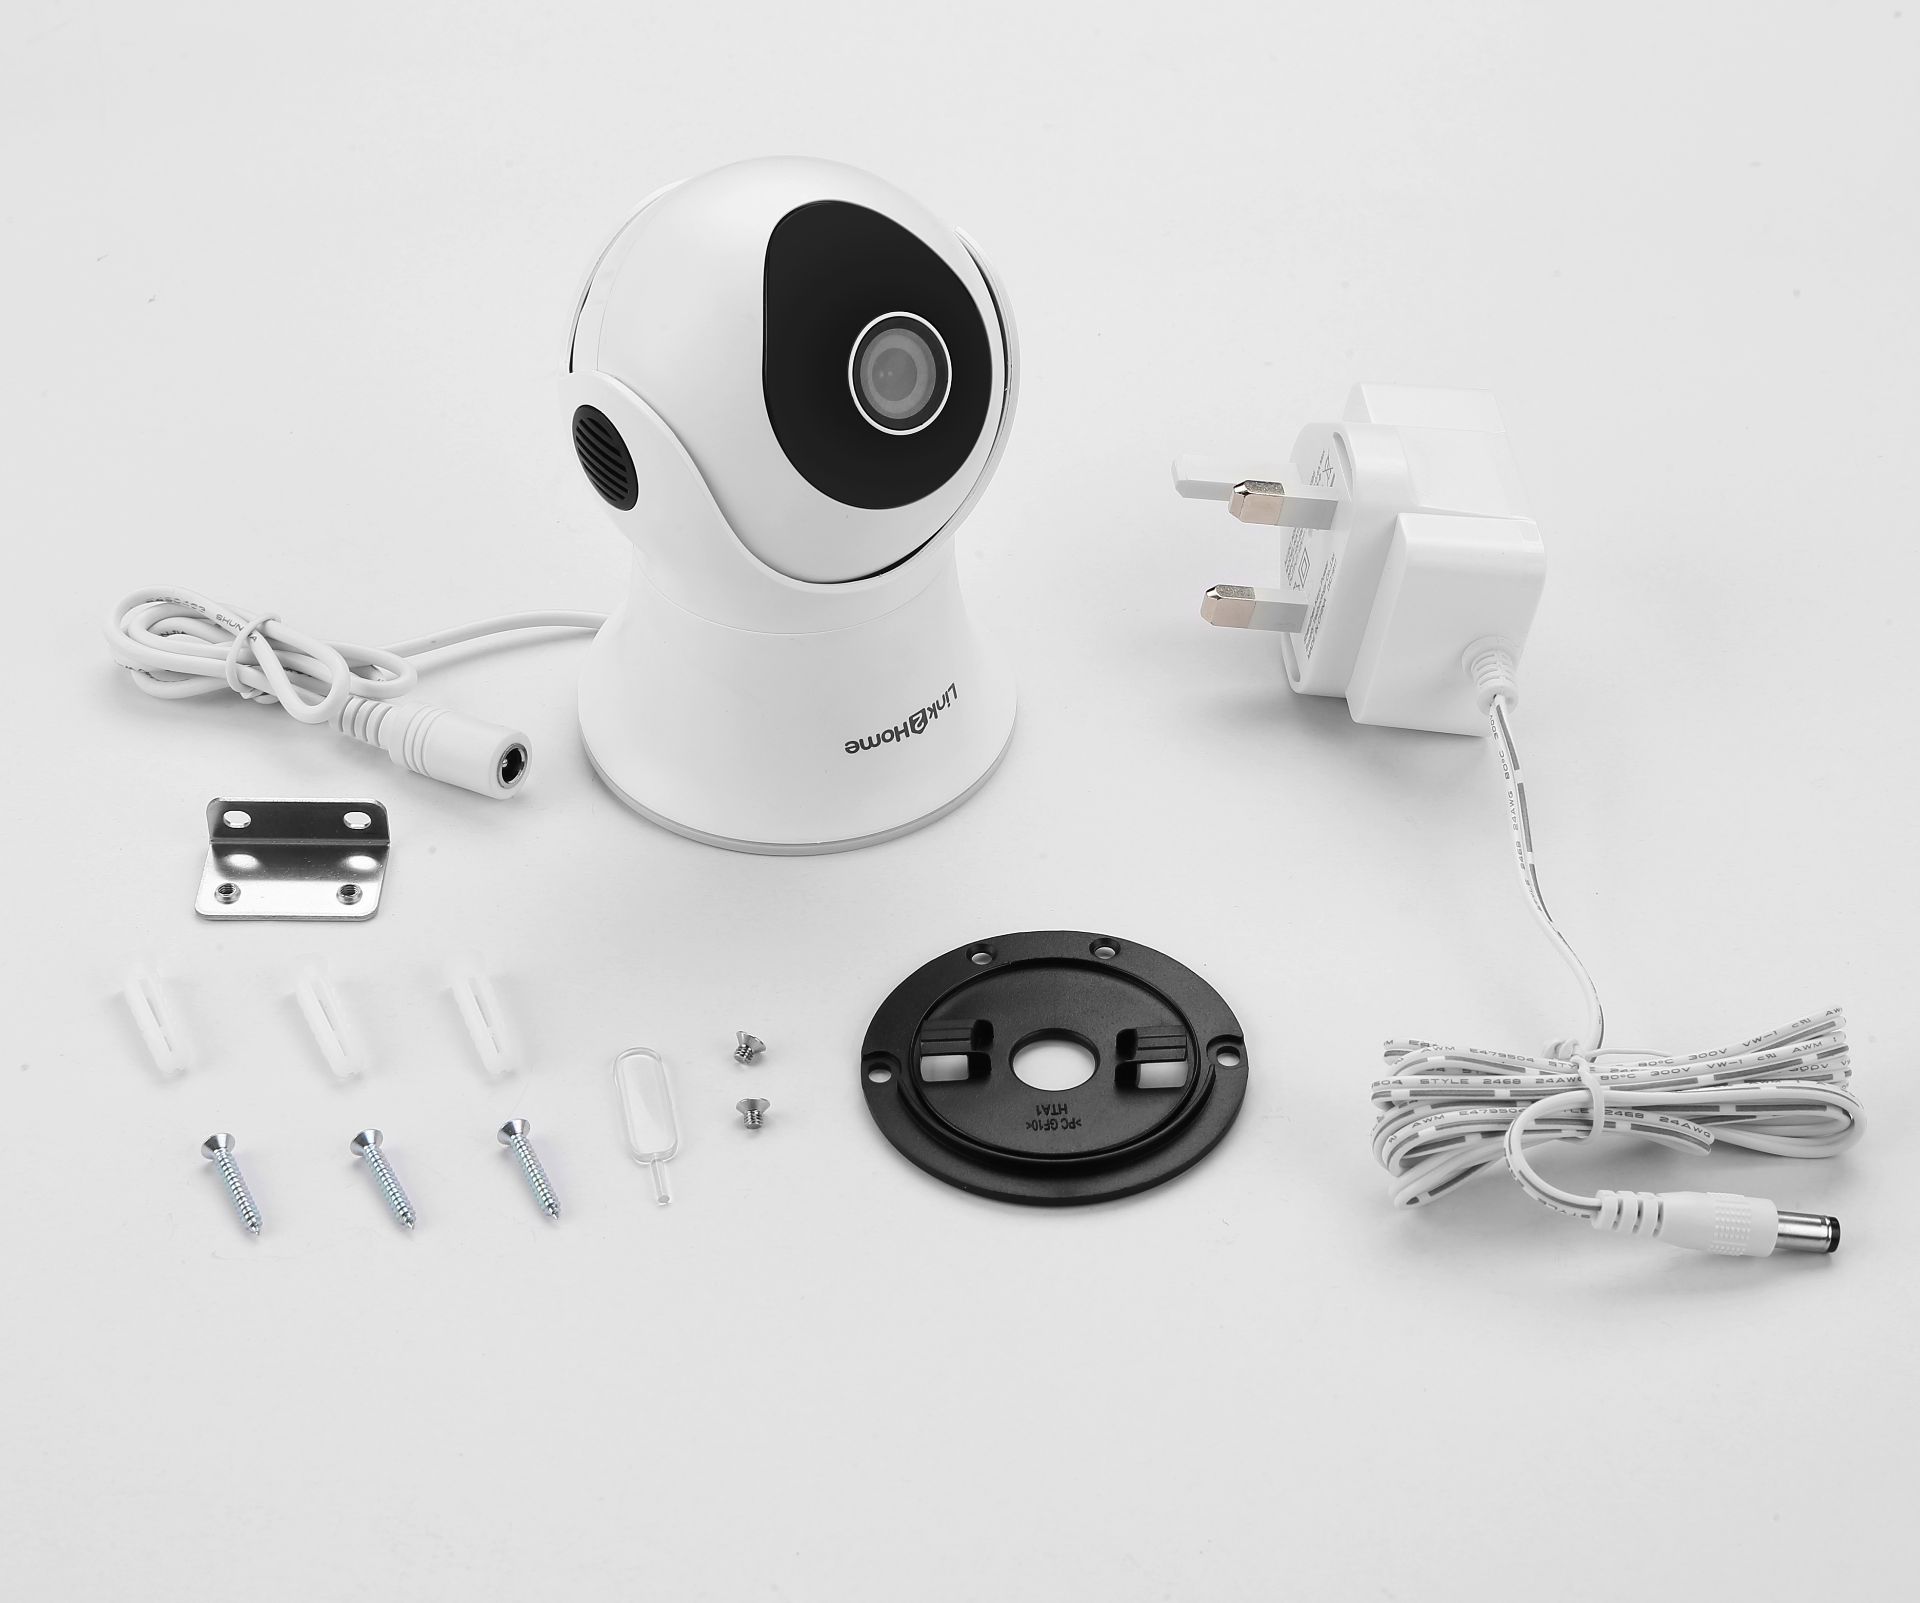 5 x Link2Home 'L2H-ODRCameraP/T' External Weatherproof Wi-Fi Cameras with Pan and Tilt Operation - - Image 8 of 14